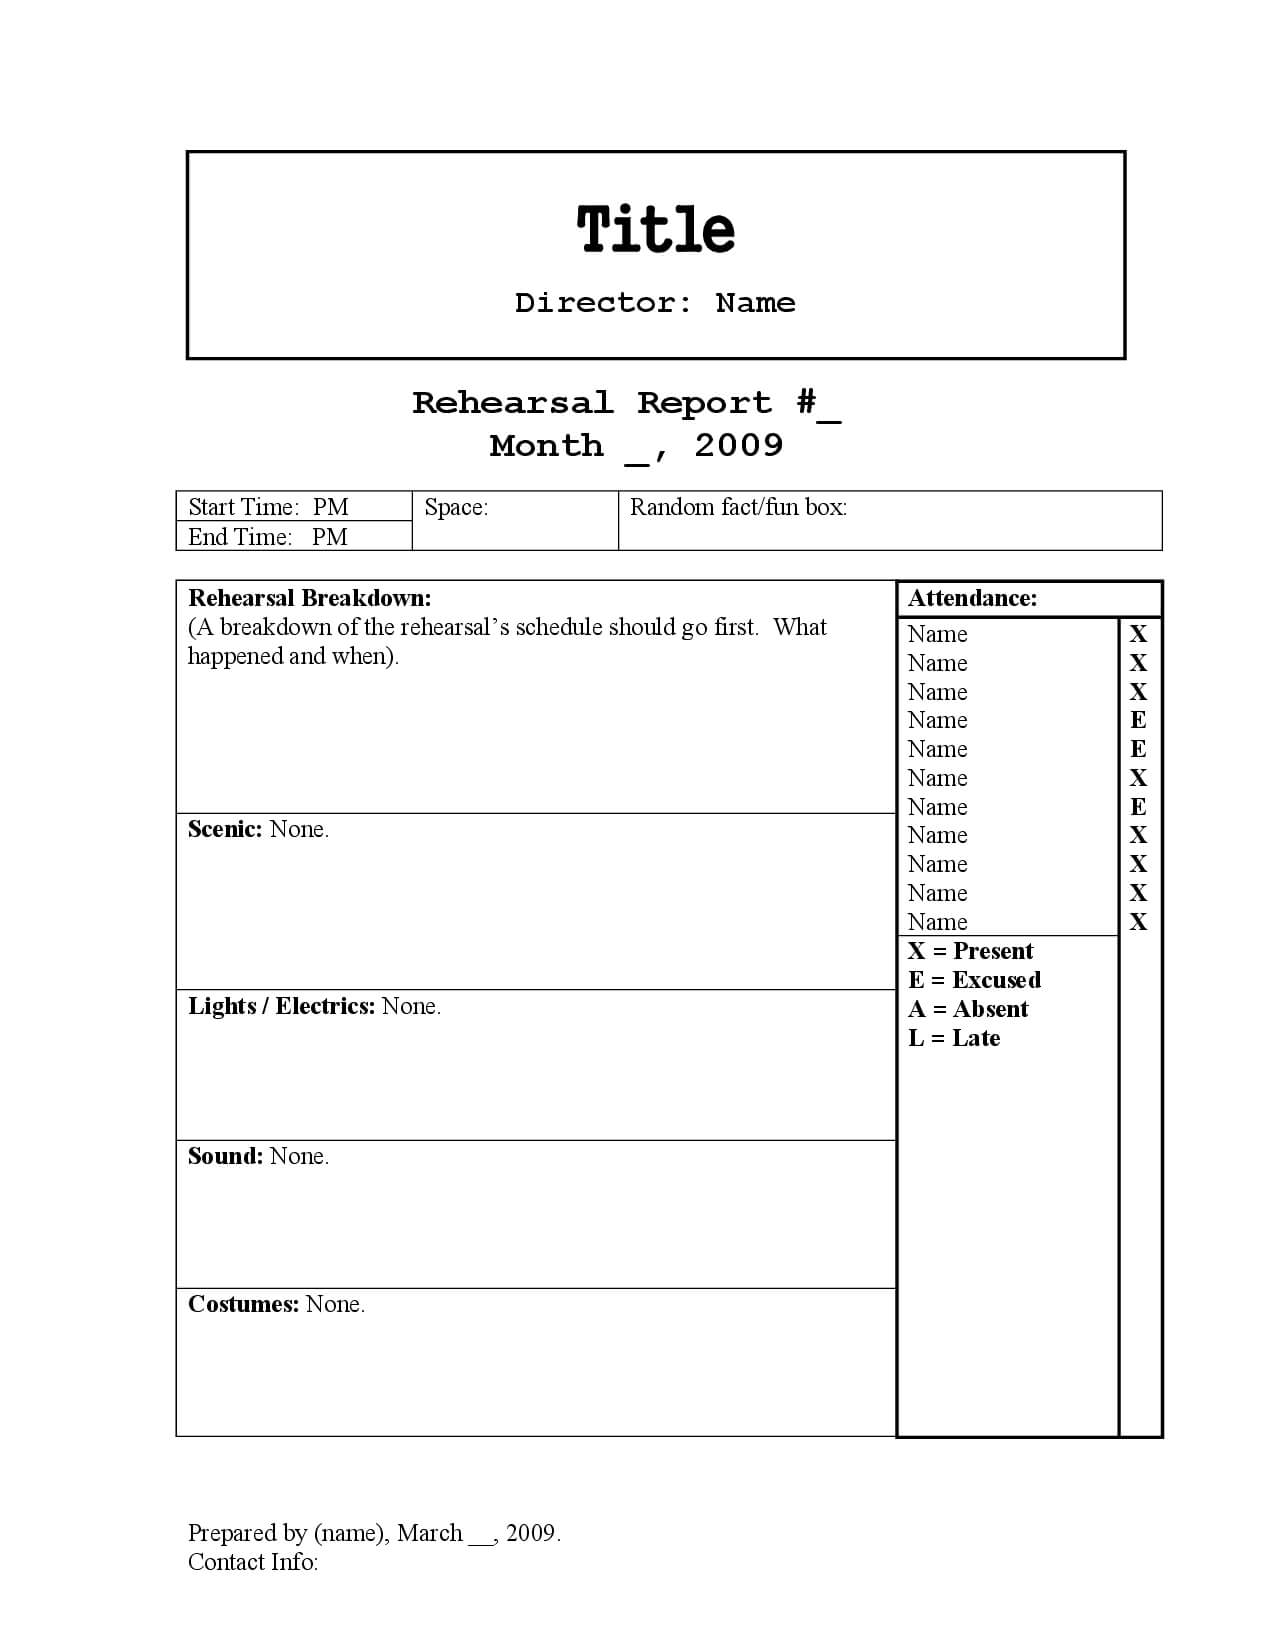 Rehearsal Report Template In 2019 | Teaching Theatre, Report Within Sound Report Template